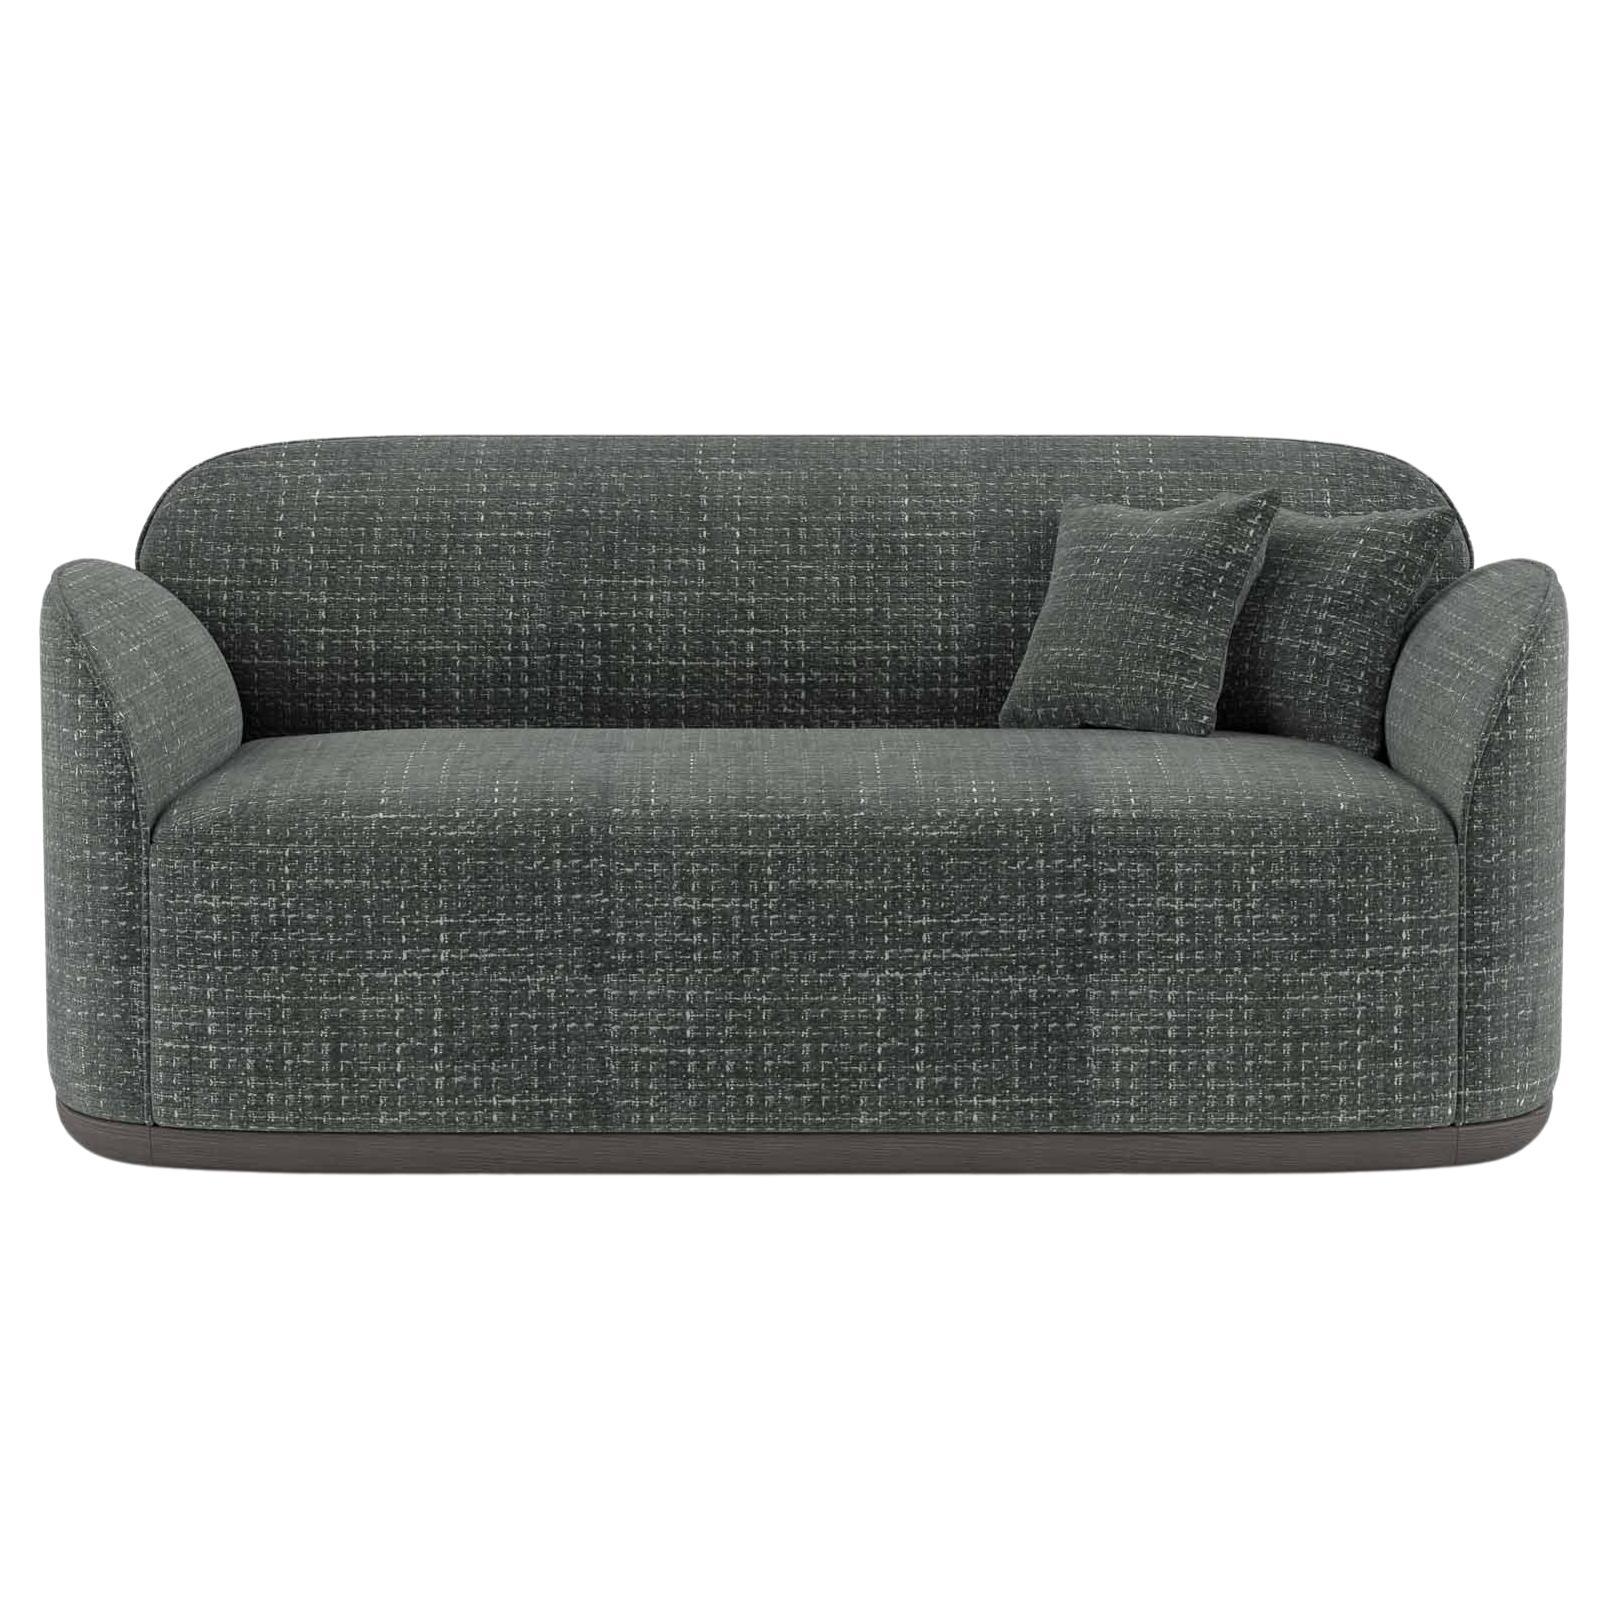 Contemporary Loveseat 'Unio' by Poiat, Chivasso Yang 95 Fabric For Sale